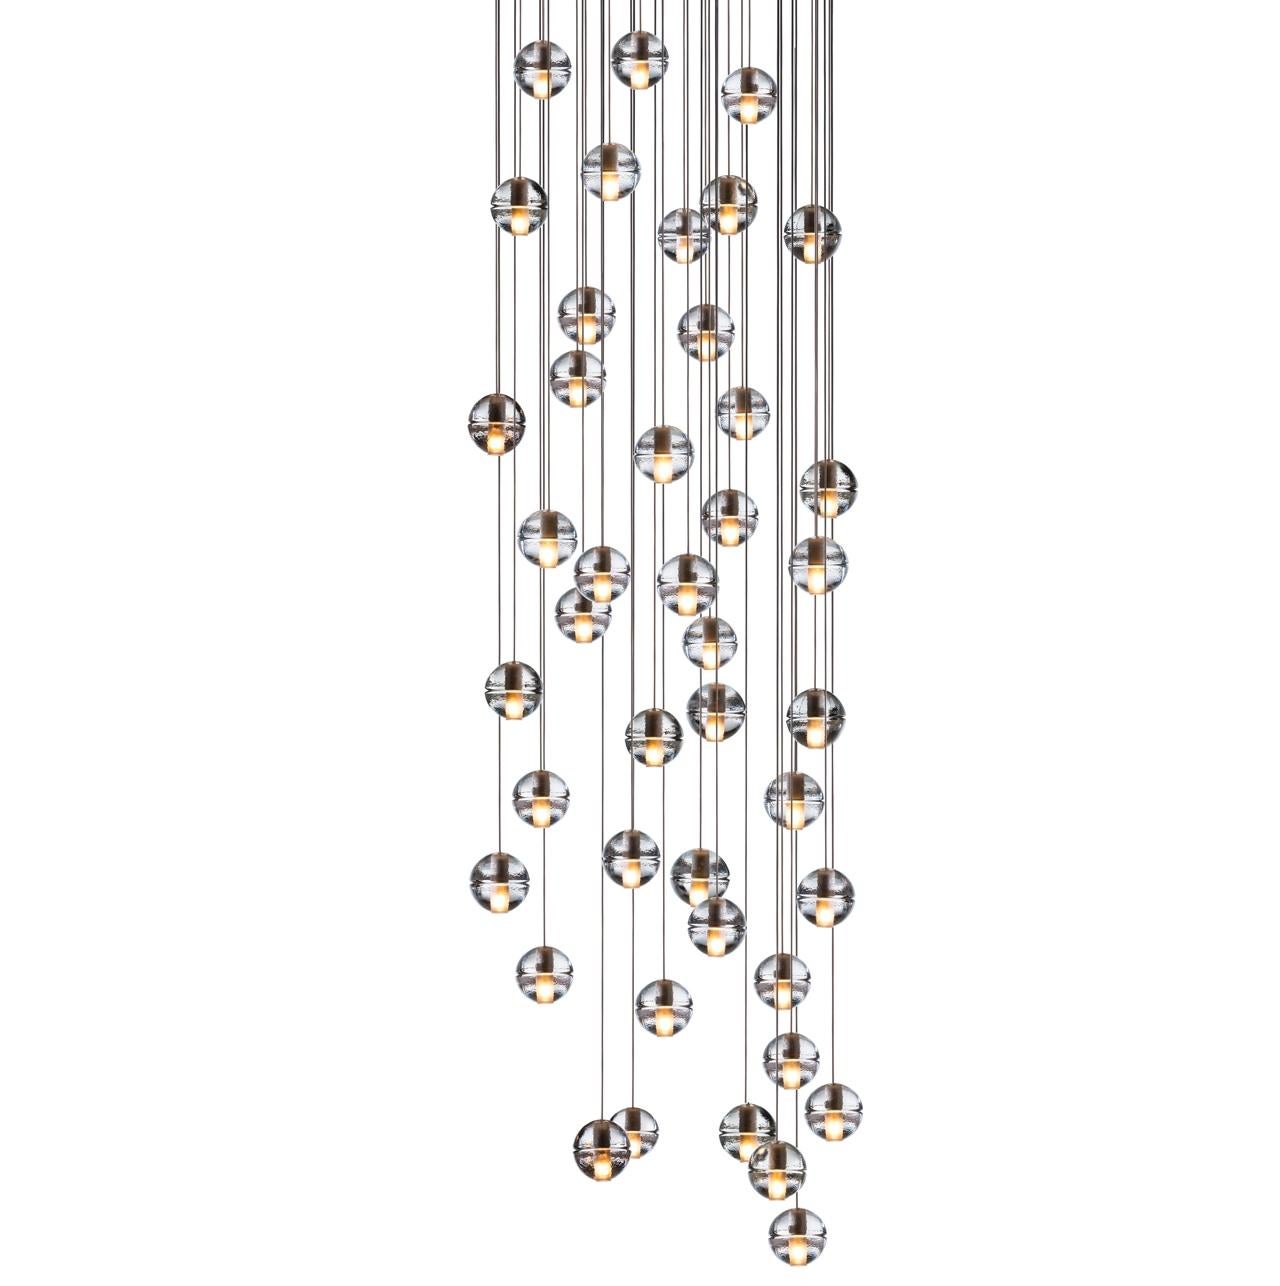 14.50 Chandelier Lamp by Bocci
Dimensions: D 75.5 x W 75.5 x H 300 cm 
Materials: Brushed Nickel, Cast glass, blown borosilicate glass, braided metal coaxial cable, electrical components, white powder-coated canopy. 
Sold individually and in